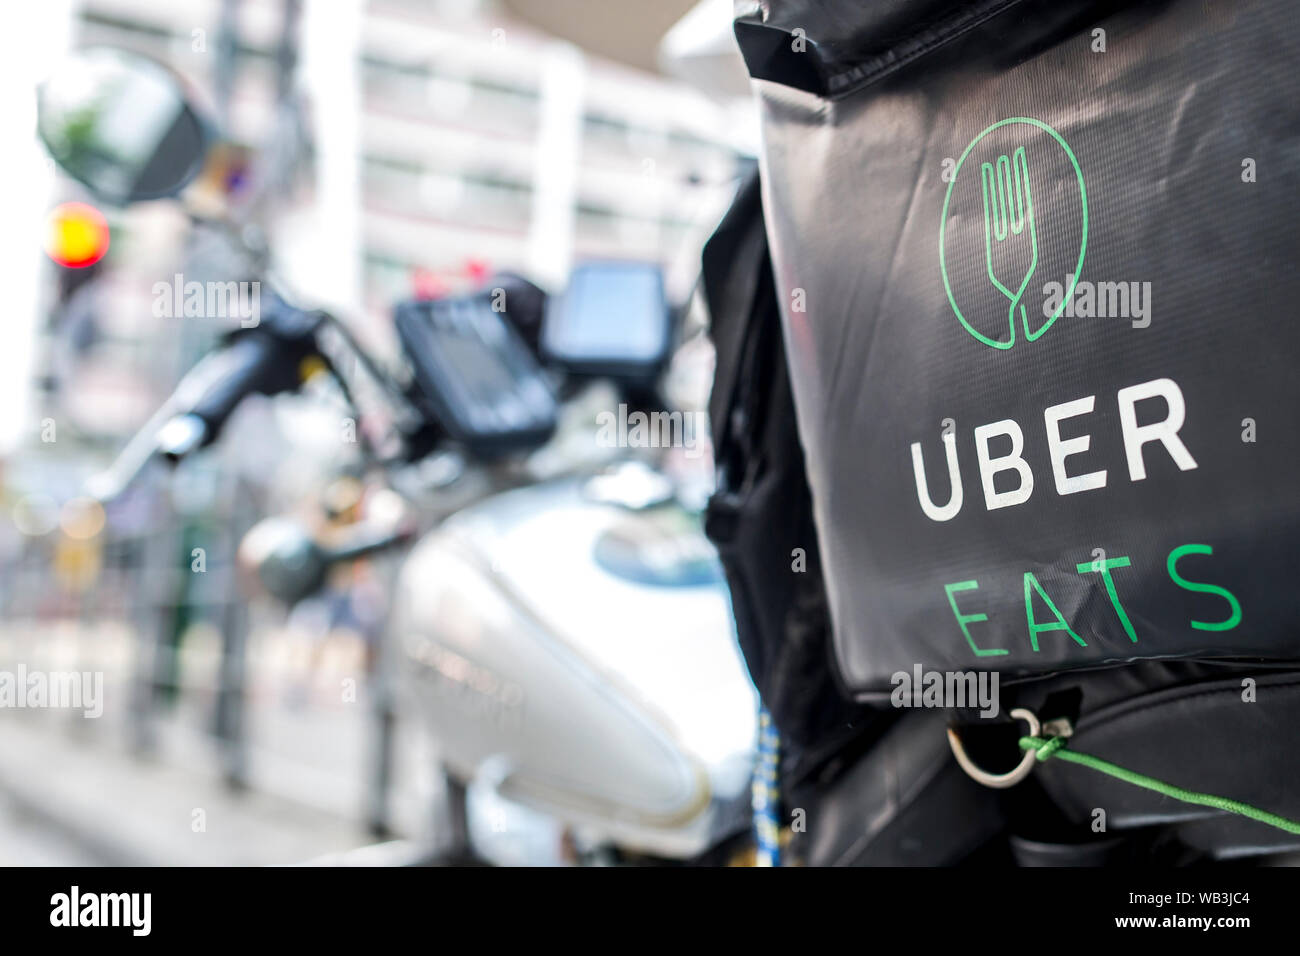 HONG KONG - OCTOBER 18, 2017: An Uber Eats  motorbike parked on the side of the road. Stock Photo